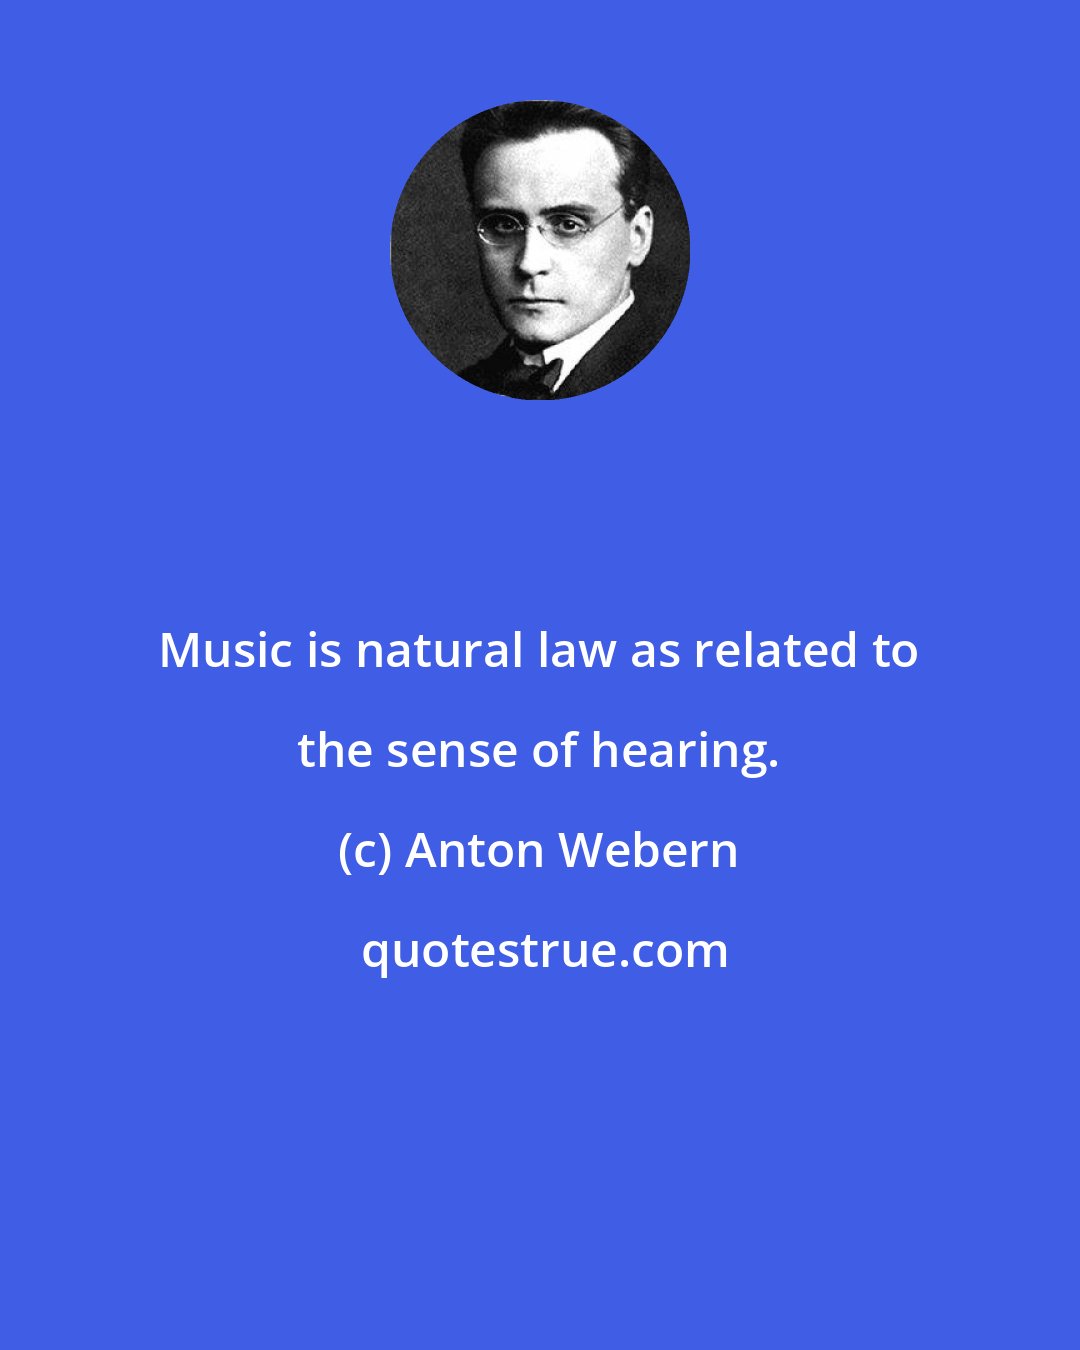 Anton Webern: Music is natural law as related to the sense of hearing.